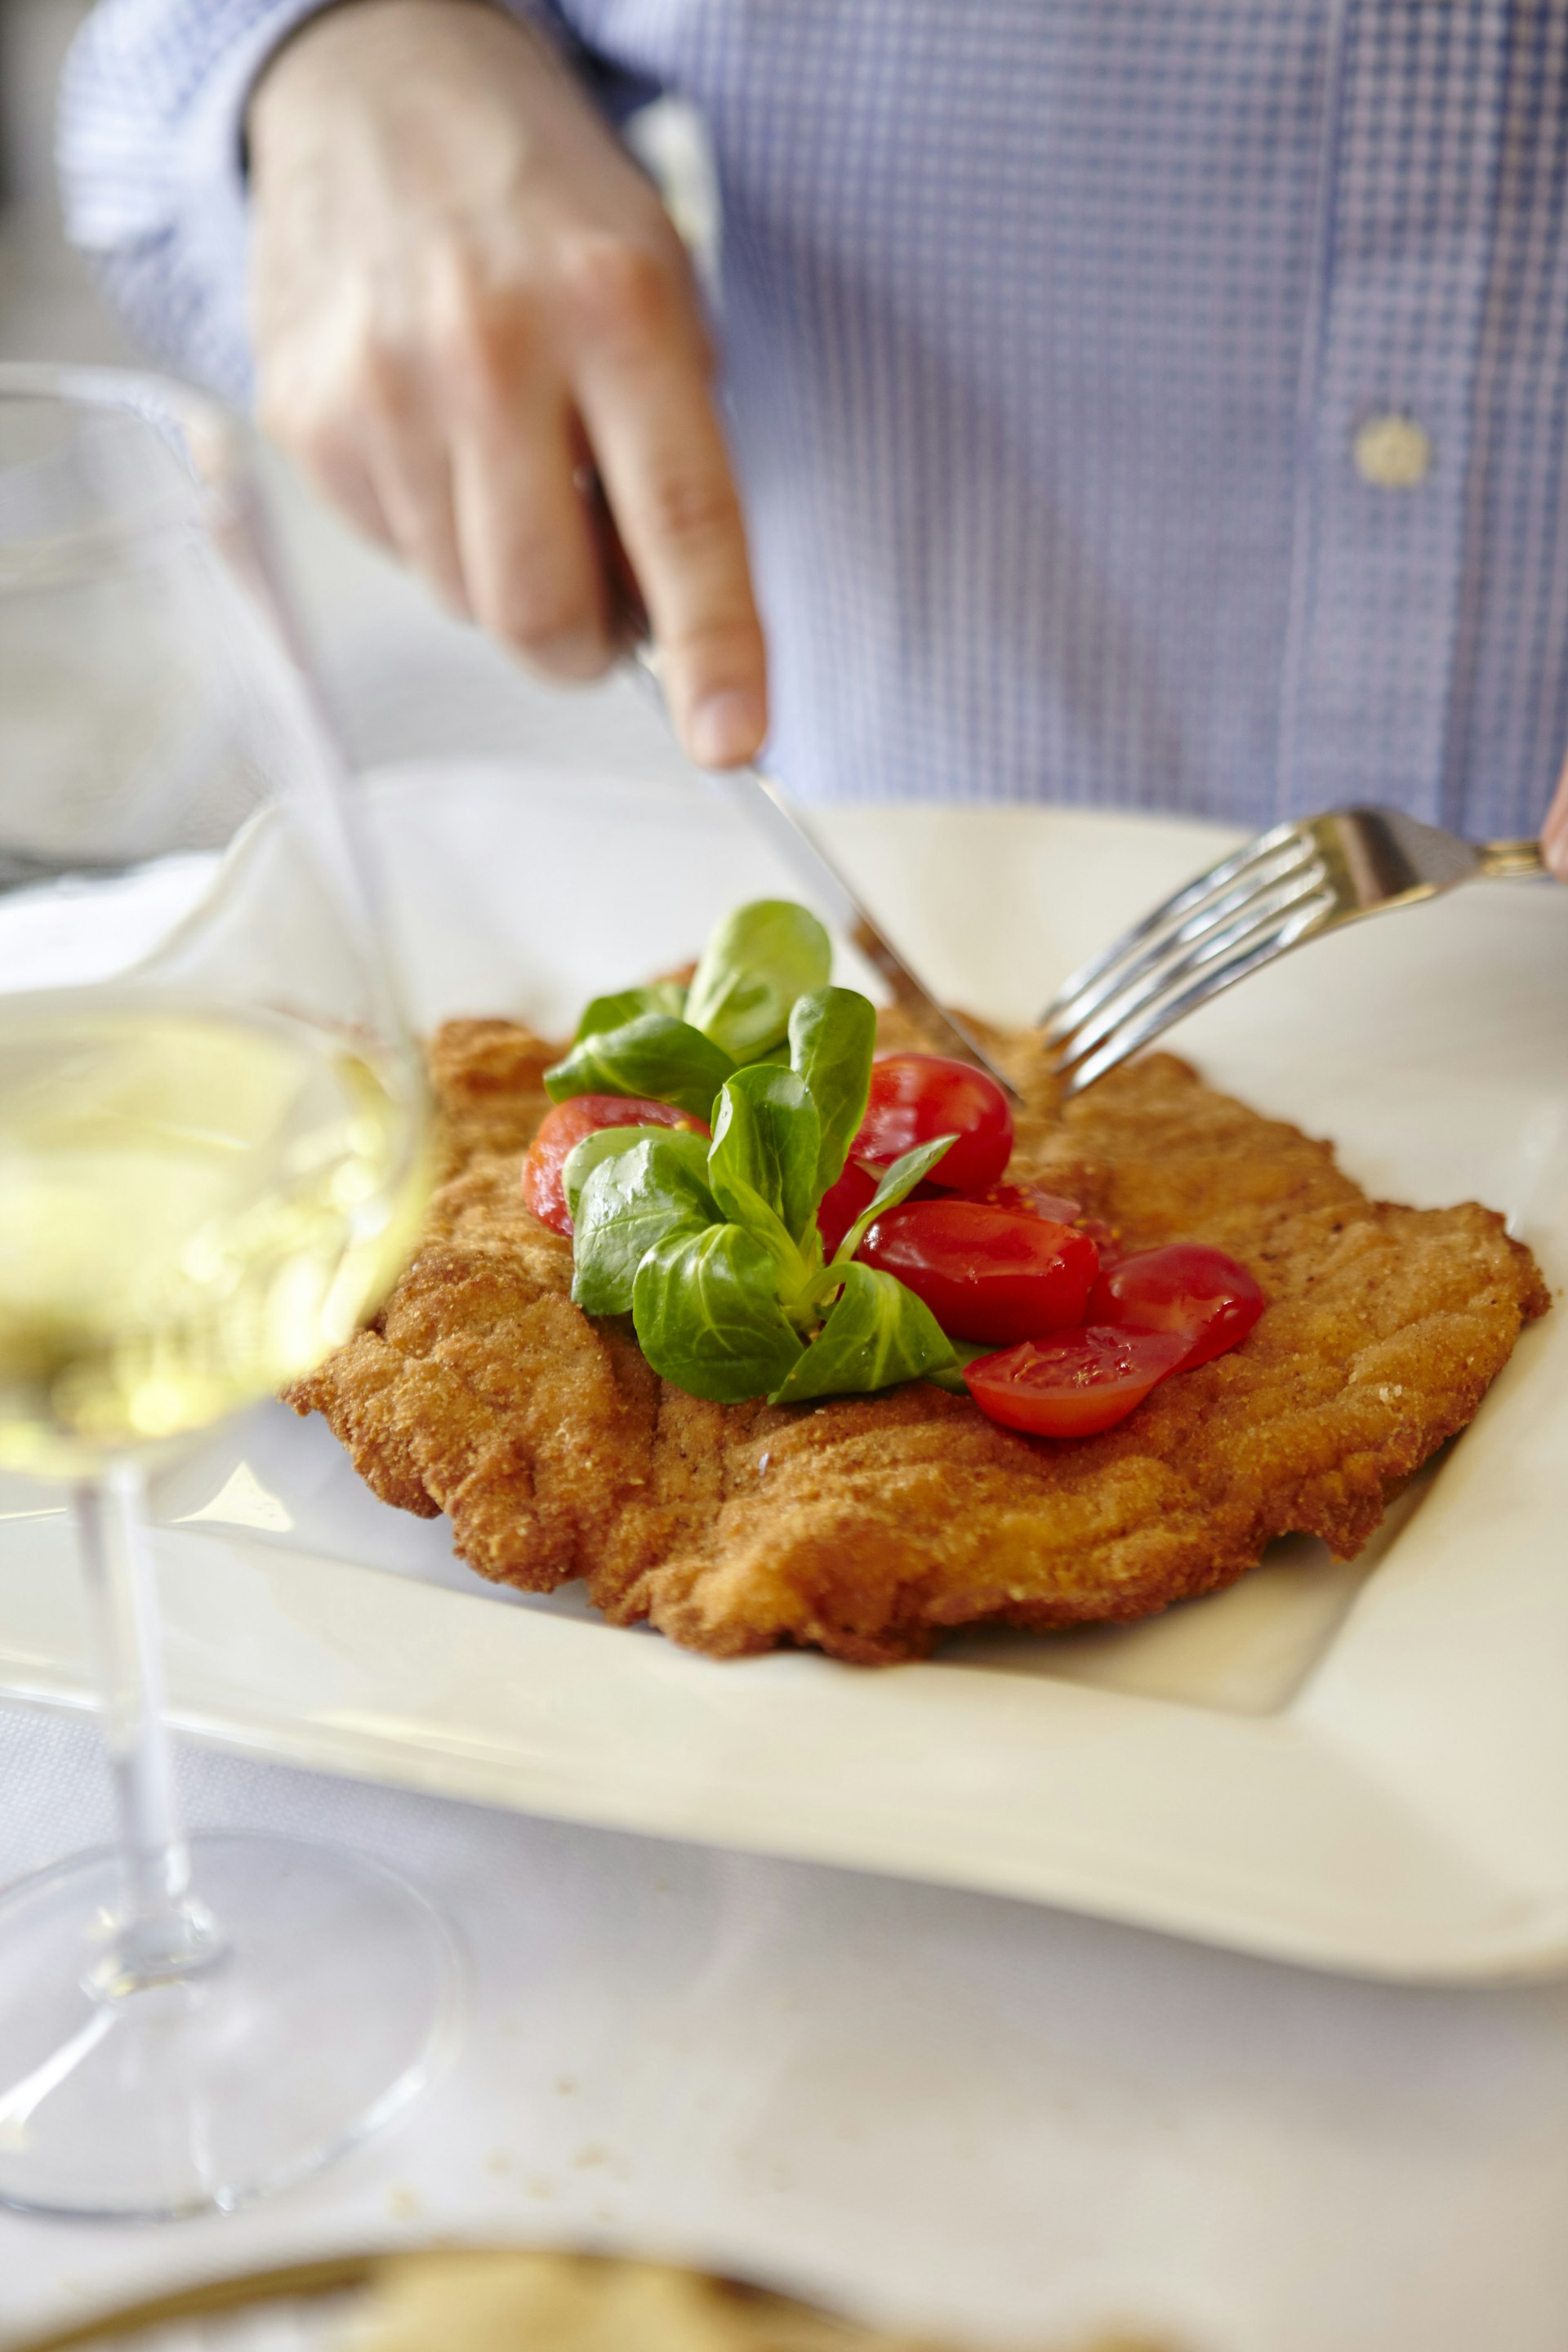 Two hands use cutlery to slice into a breaded piece of meat on a white plate